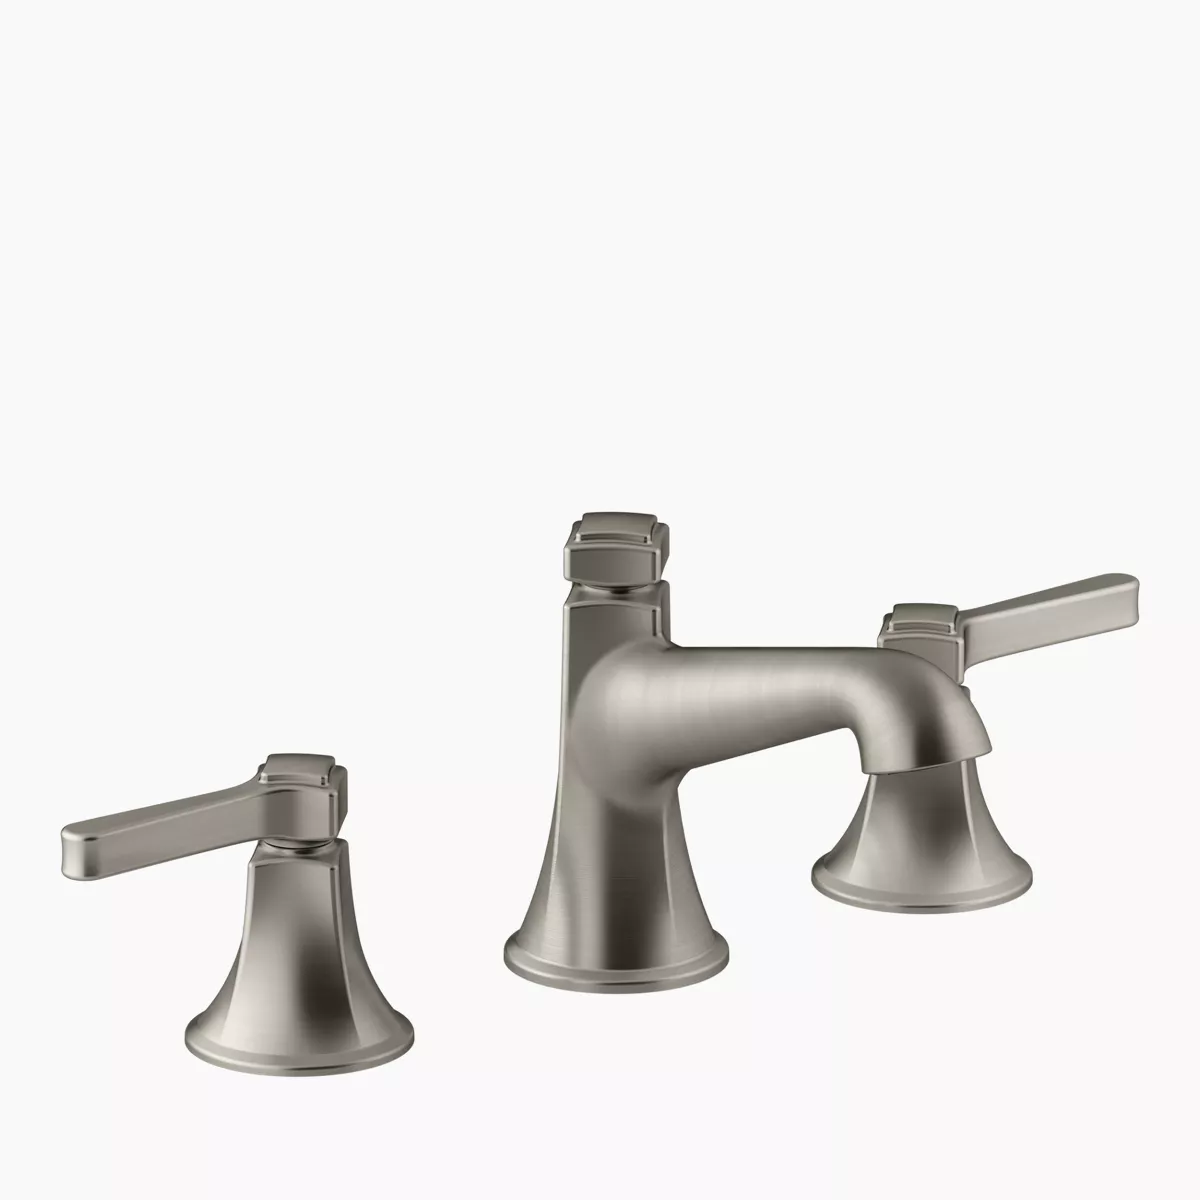 Devonshire Widespread Sink Faucet with Lever Handles, K-394-4